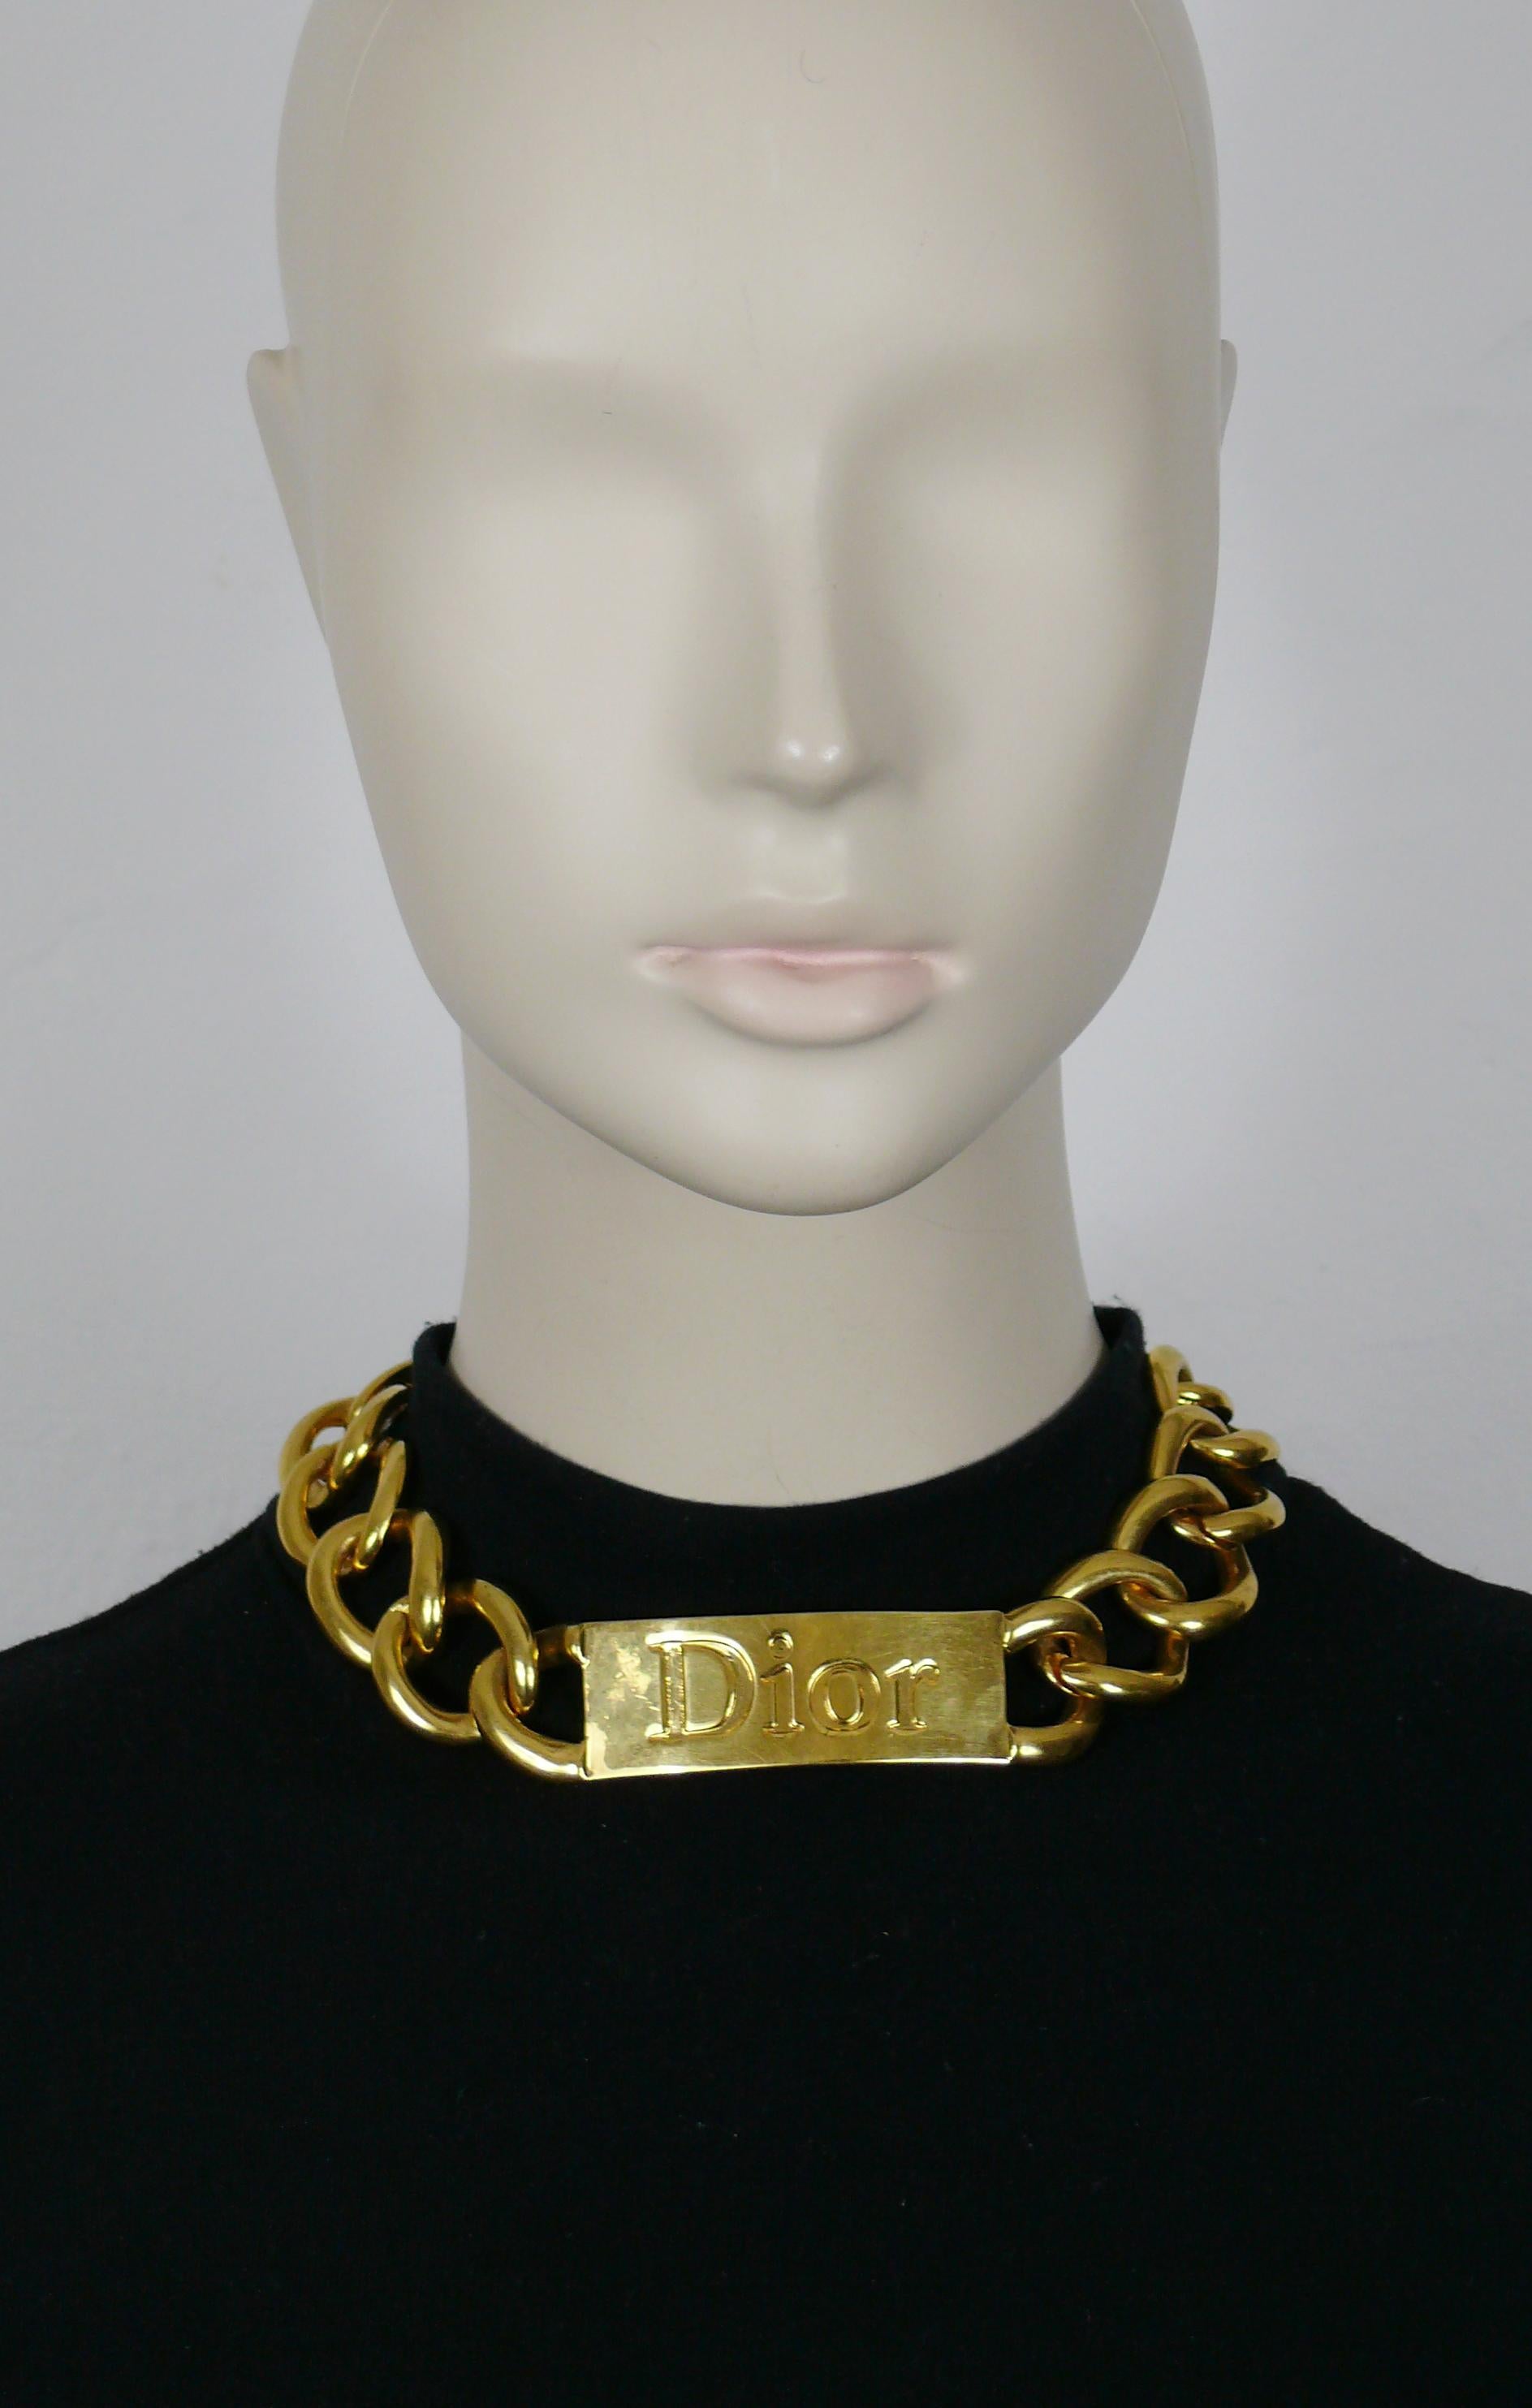 CHRISTIAN DIOR by JOHN GALLIANO massive gold tone runway necklace featuring curb links and ID tag embossed DIOR.

CHRISTIAN DIOR Ready-To-Wear Fall 2000-2001.

Hook clasp closure.

Embossed DIOR ®.

Indicative measurements : adjustable length from